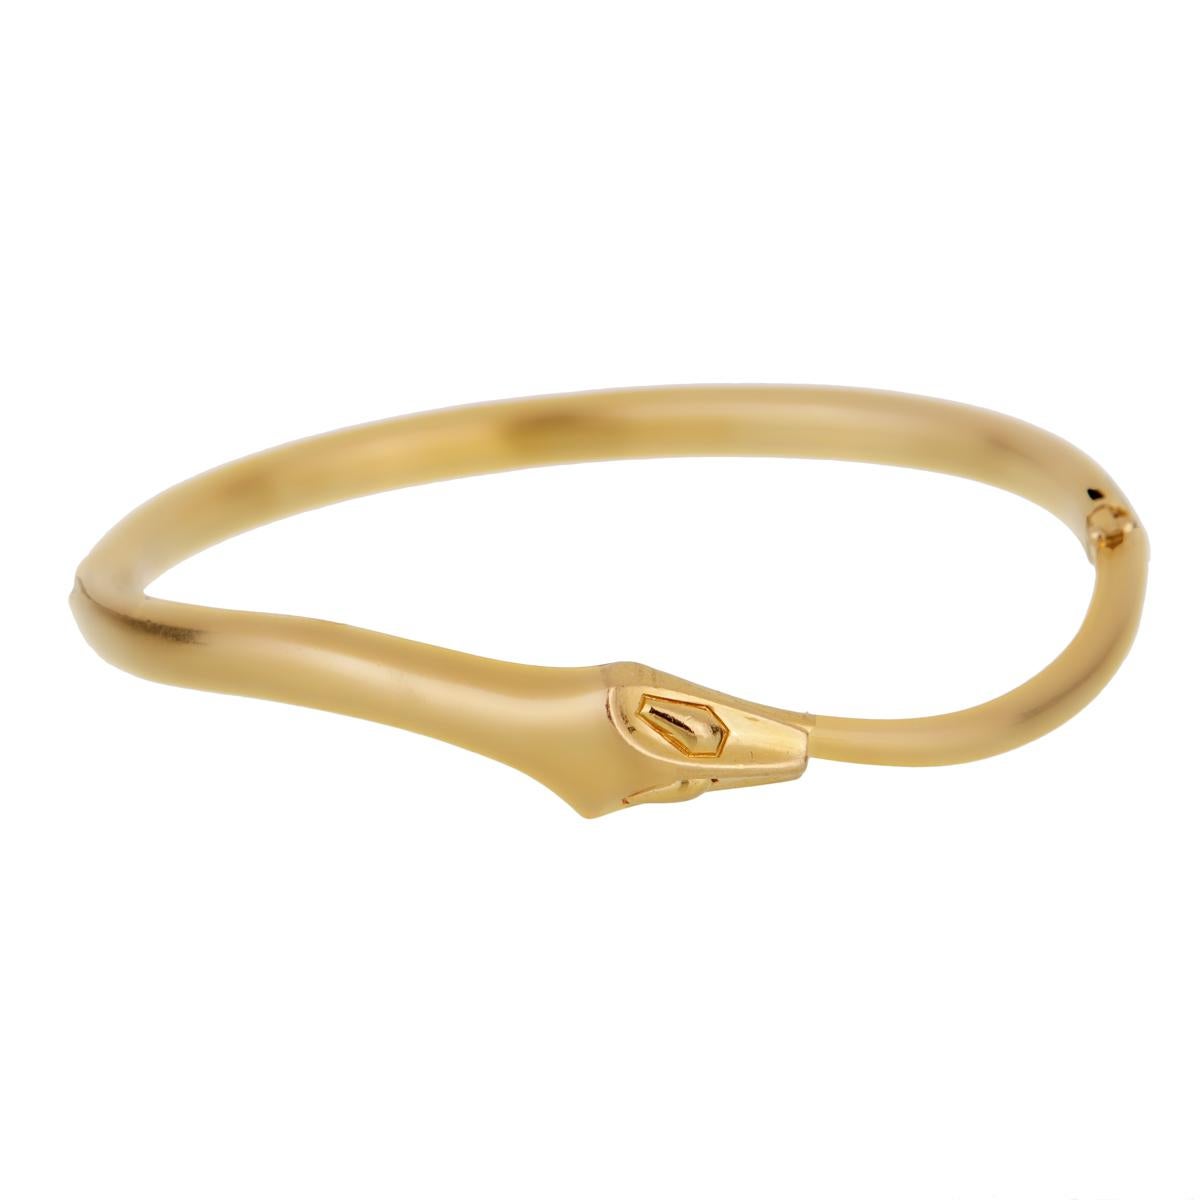 A fabulous vintage Boucheron snake hinged bangle in 18karat yellow gold, designed as a snake seamlessly coiling around the wrist.